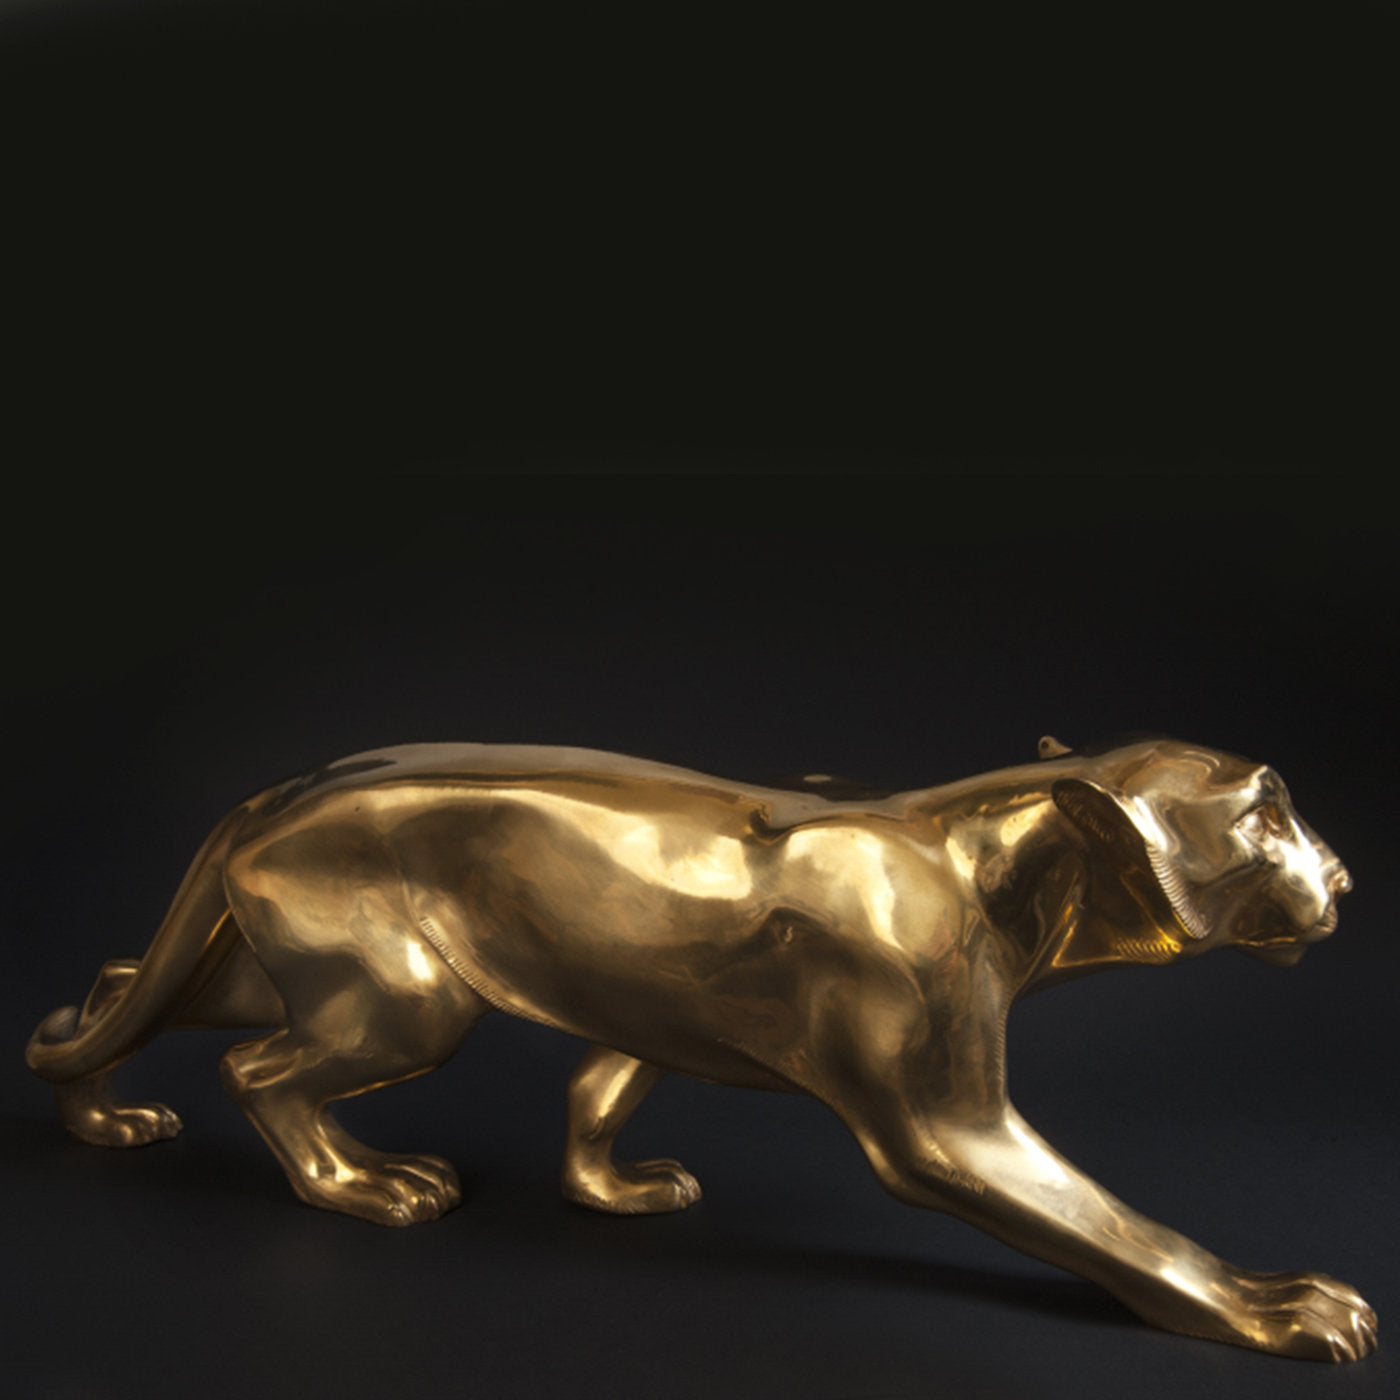 Panther Gold Statuette - Alternative view 1